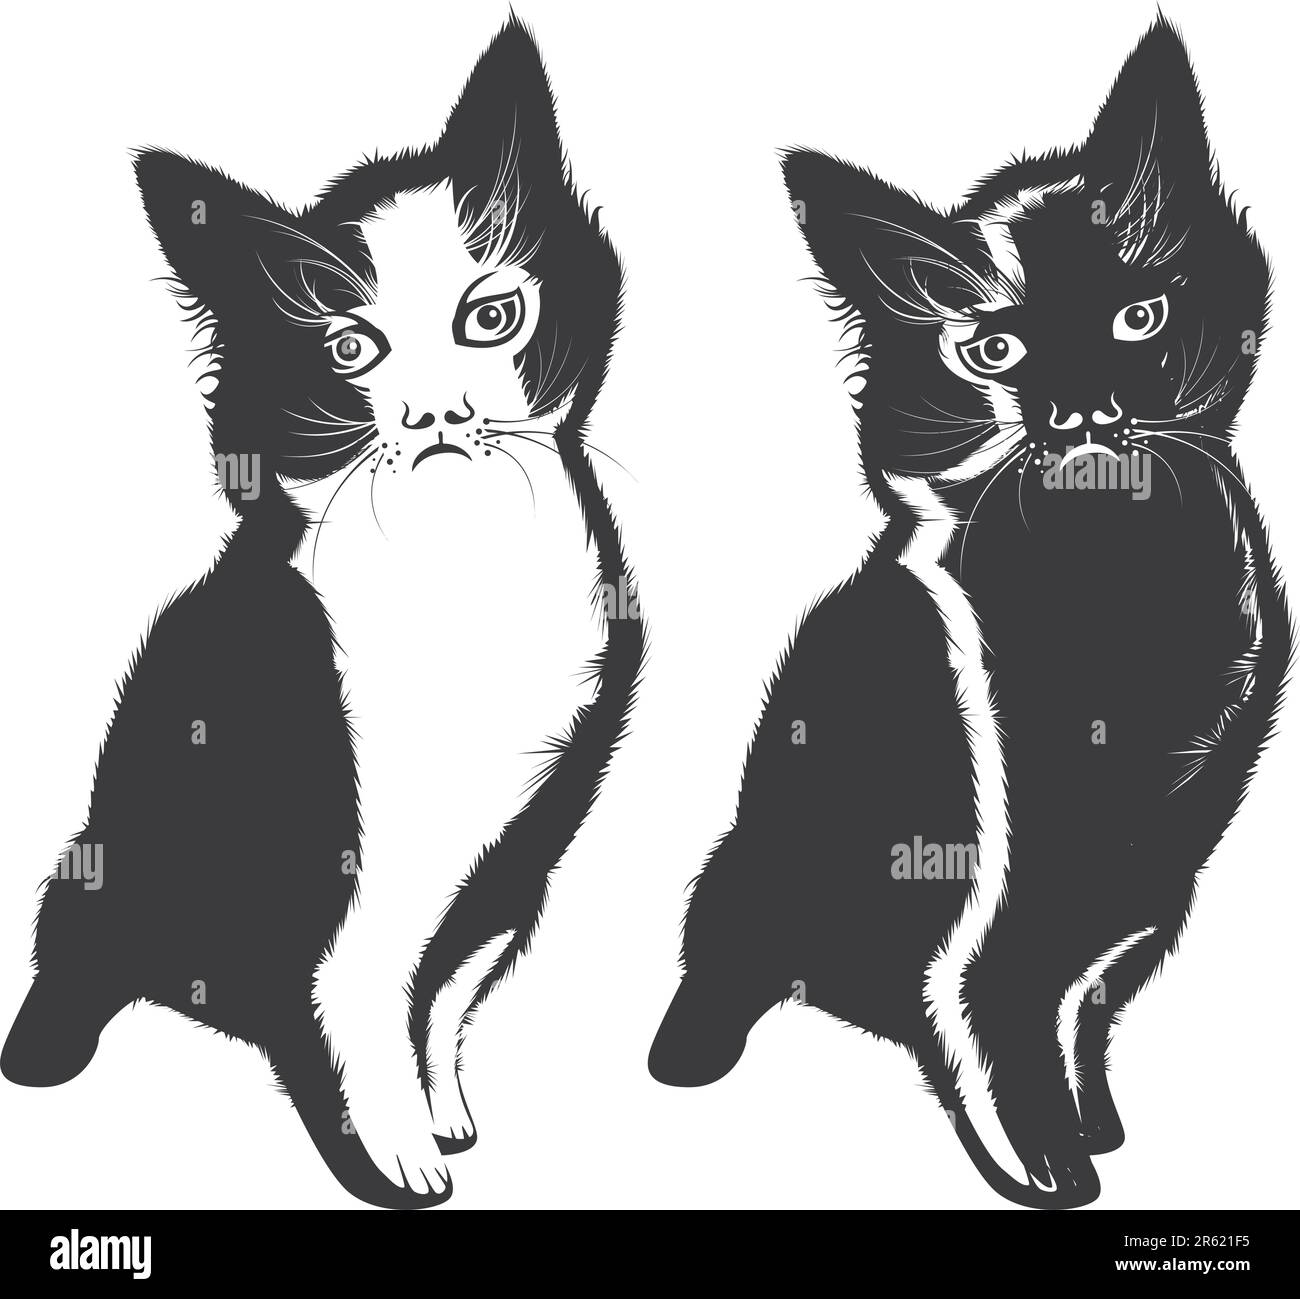 Black and whtie detailed cat pattern design. Stock Vector